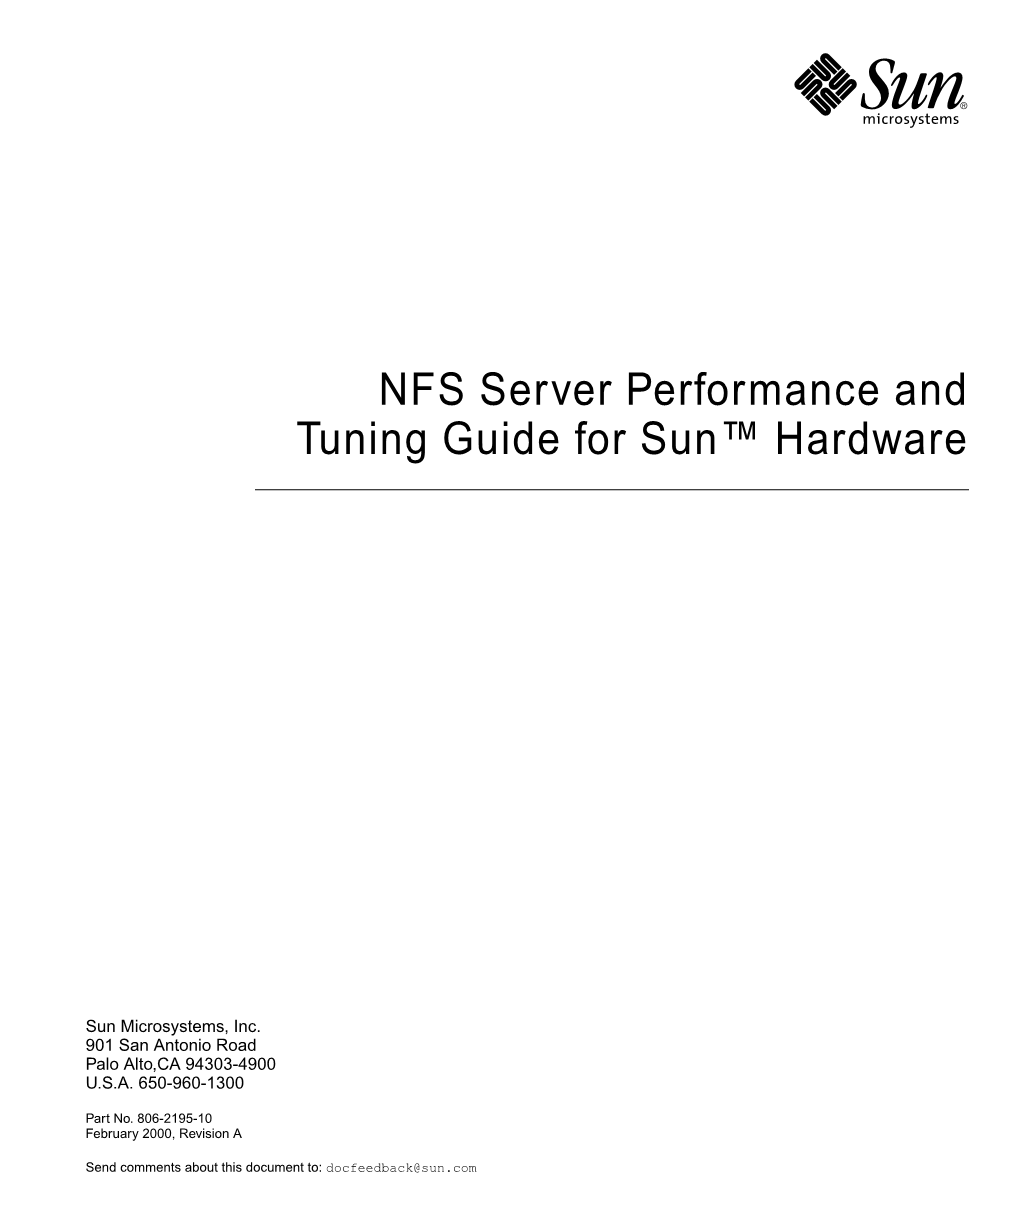 NFS Server Performance and Tuning Guide for Sun Hardware • February 2000 4